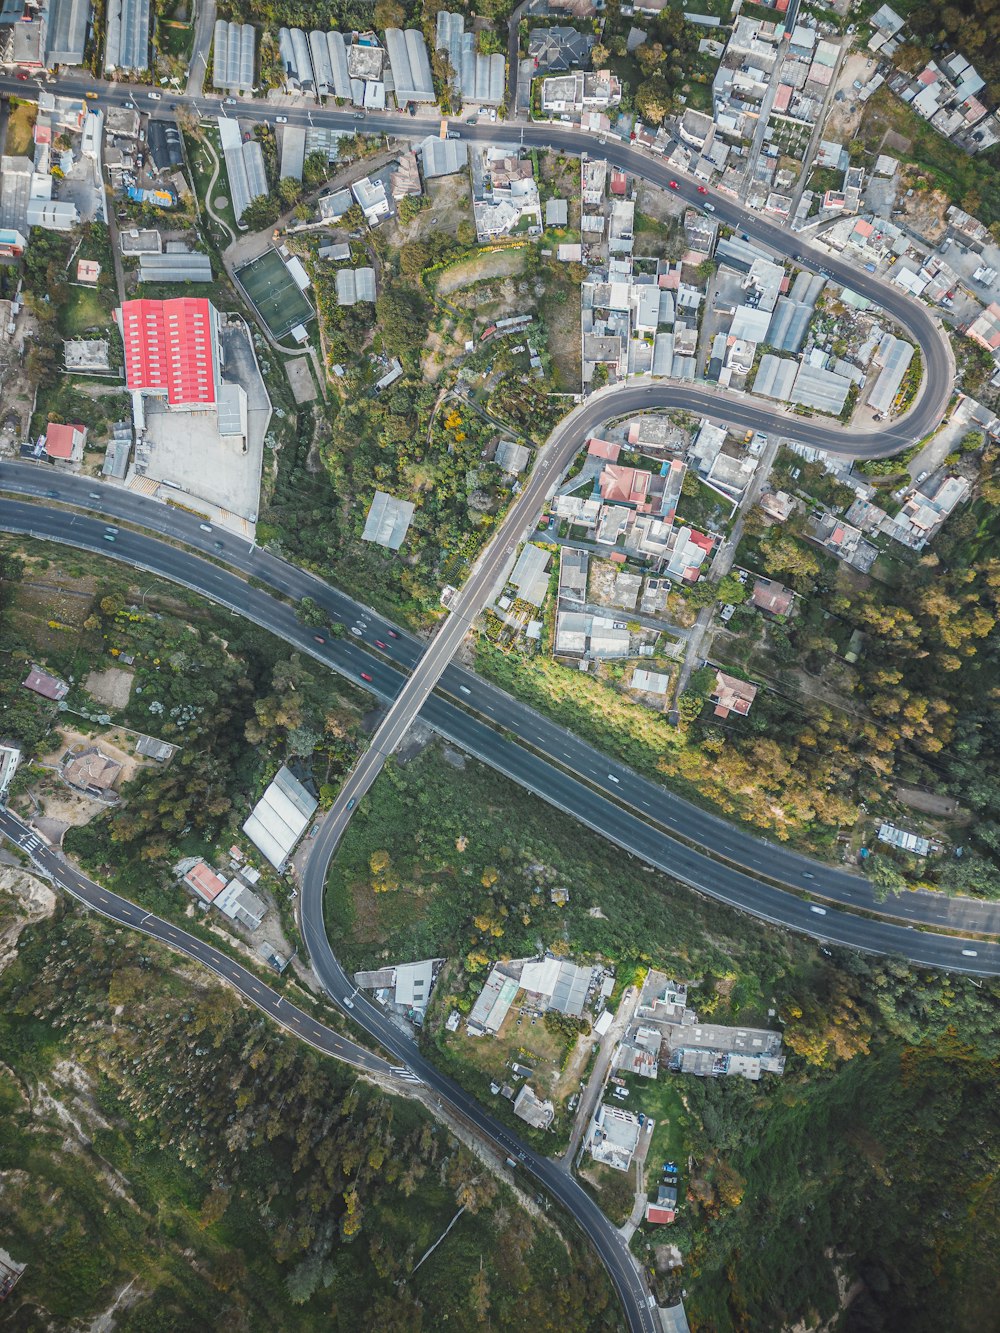 an aerial view of a road intersection in a city